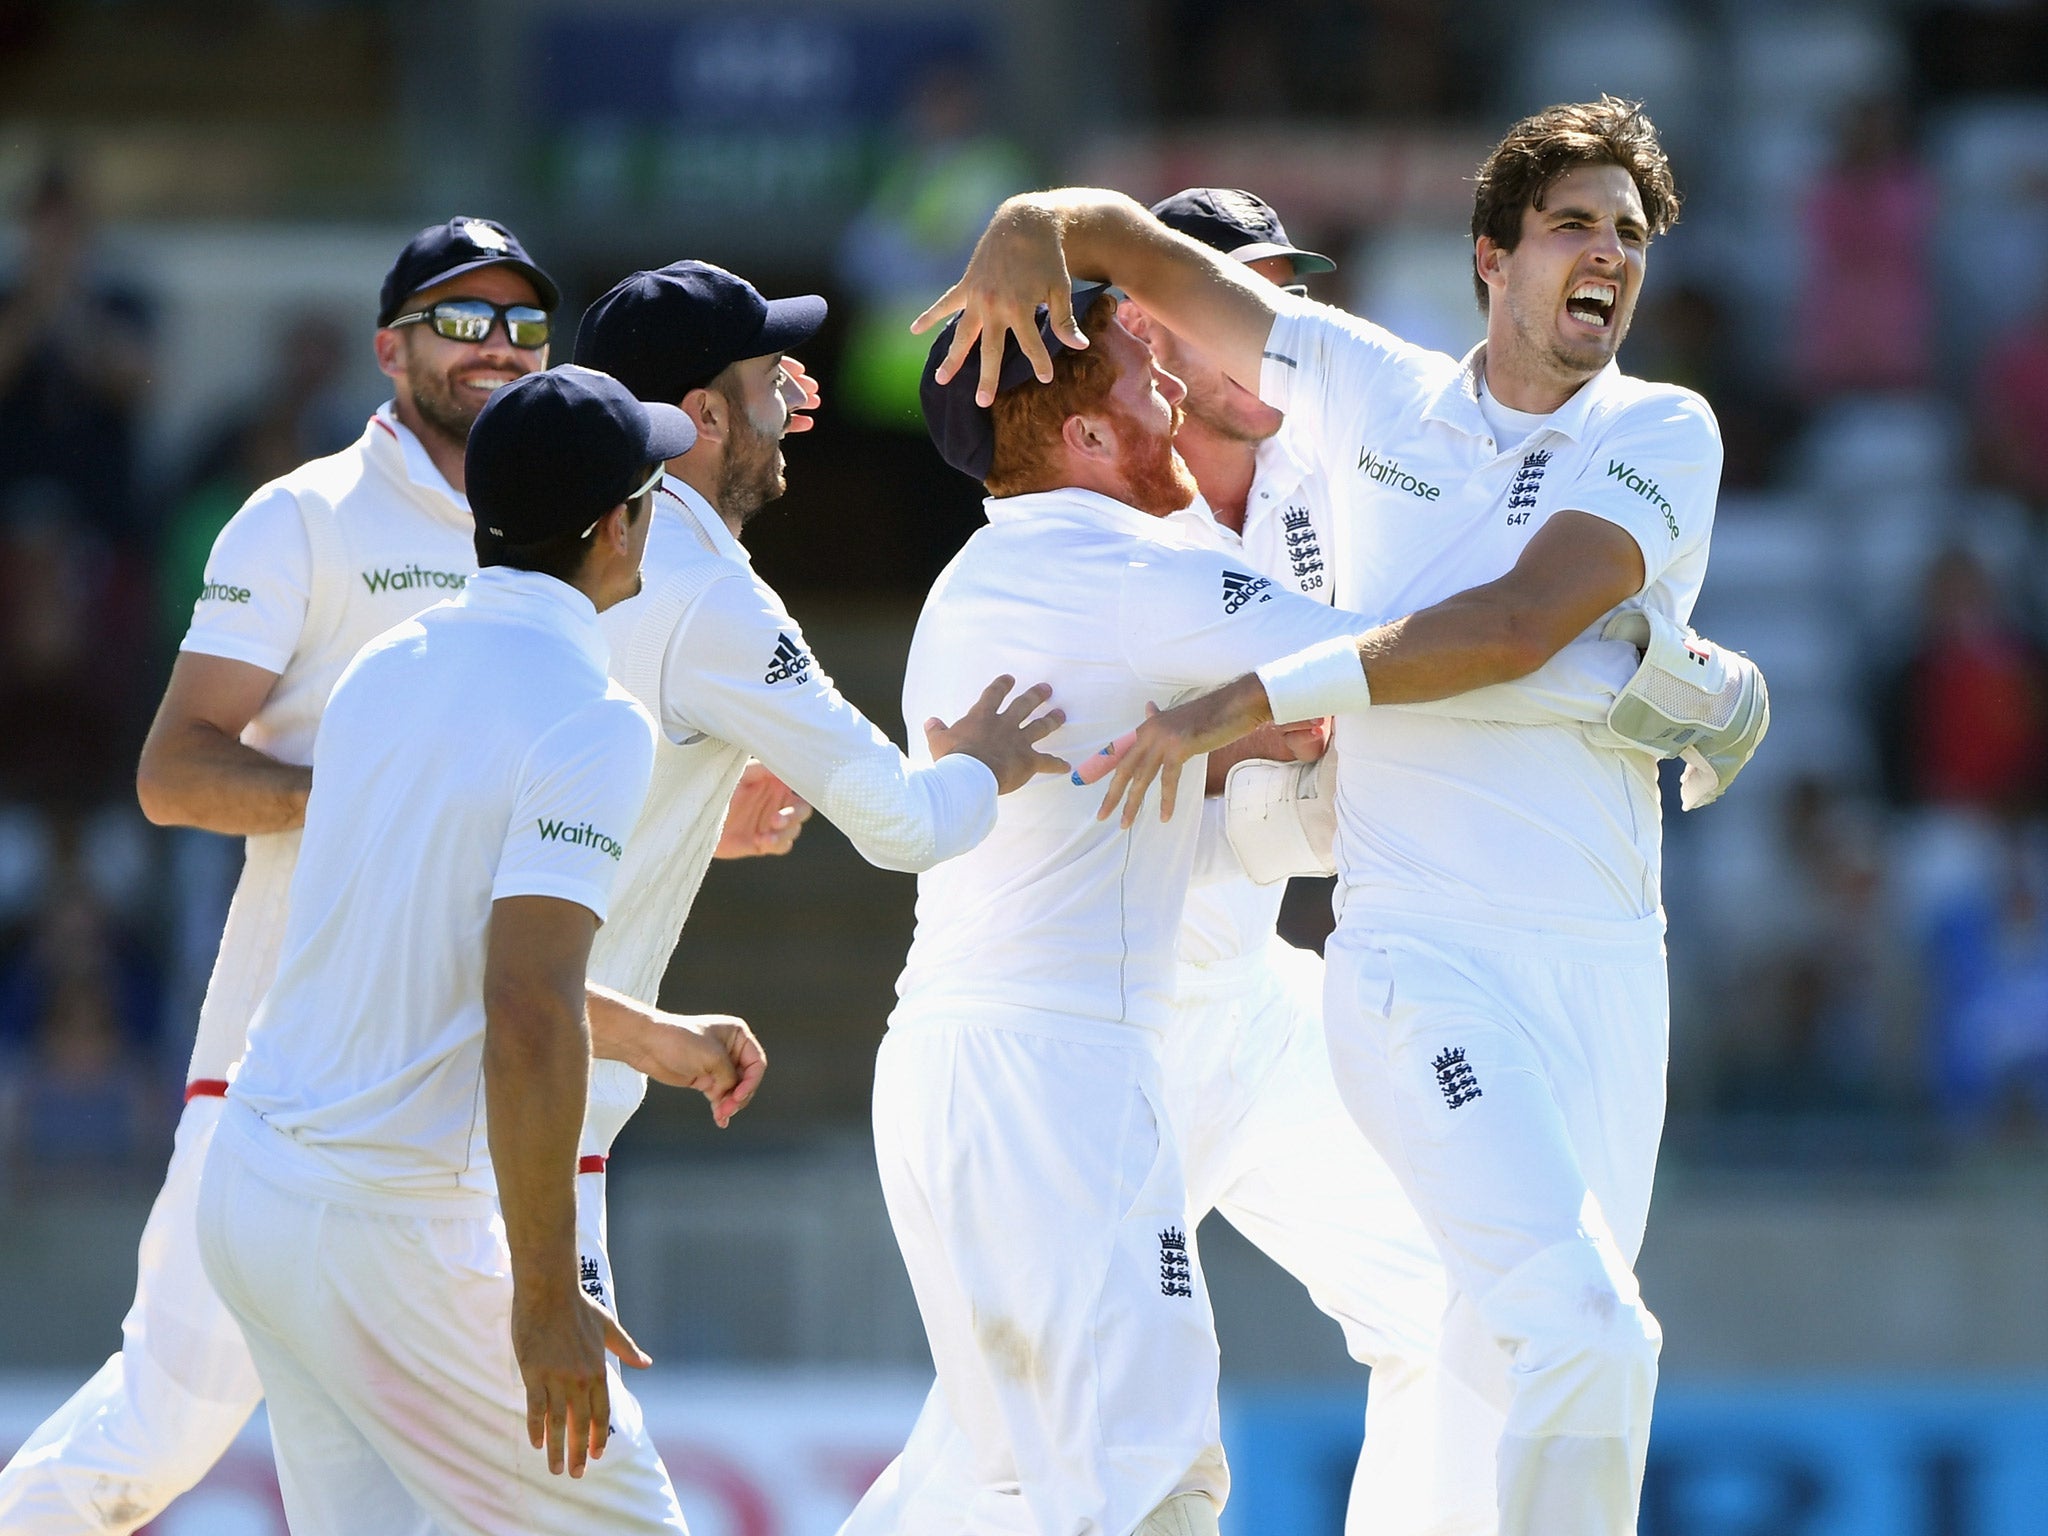 Steven Finn is swamped by his England teammates after taking the wicket of Sami Aslam